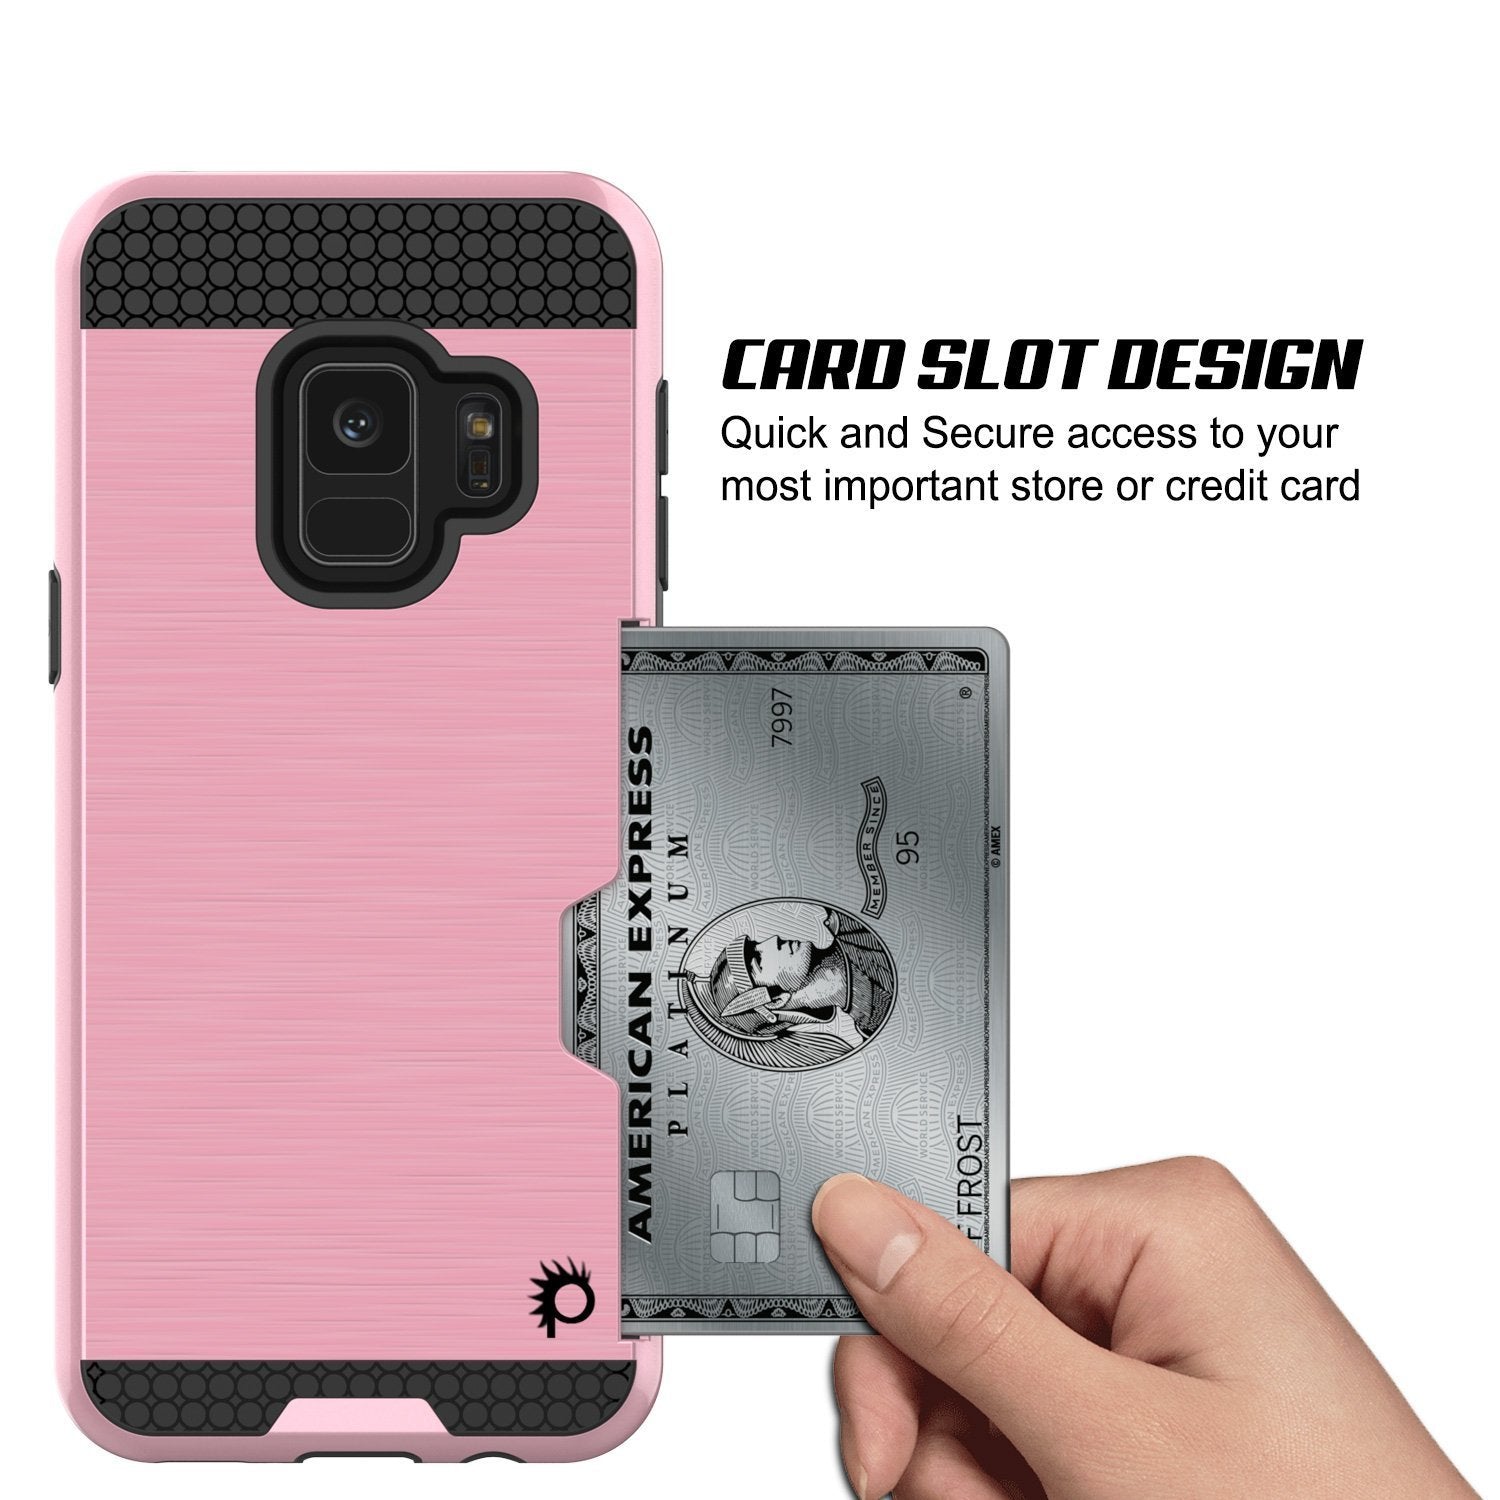 Galaxy S9 Case, PUNKcase [SLOT Series] [Slim Fit] Dual-Layer Armor Cover w/Integrated Anti-Shock System, Credit Card Slot [Pink]